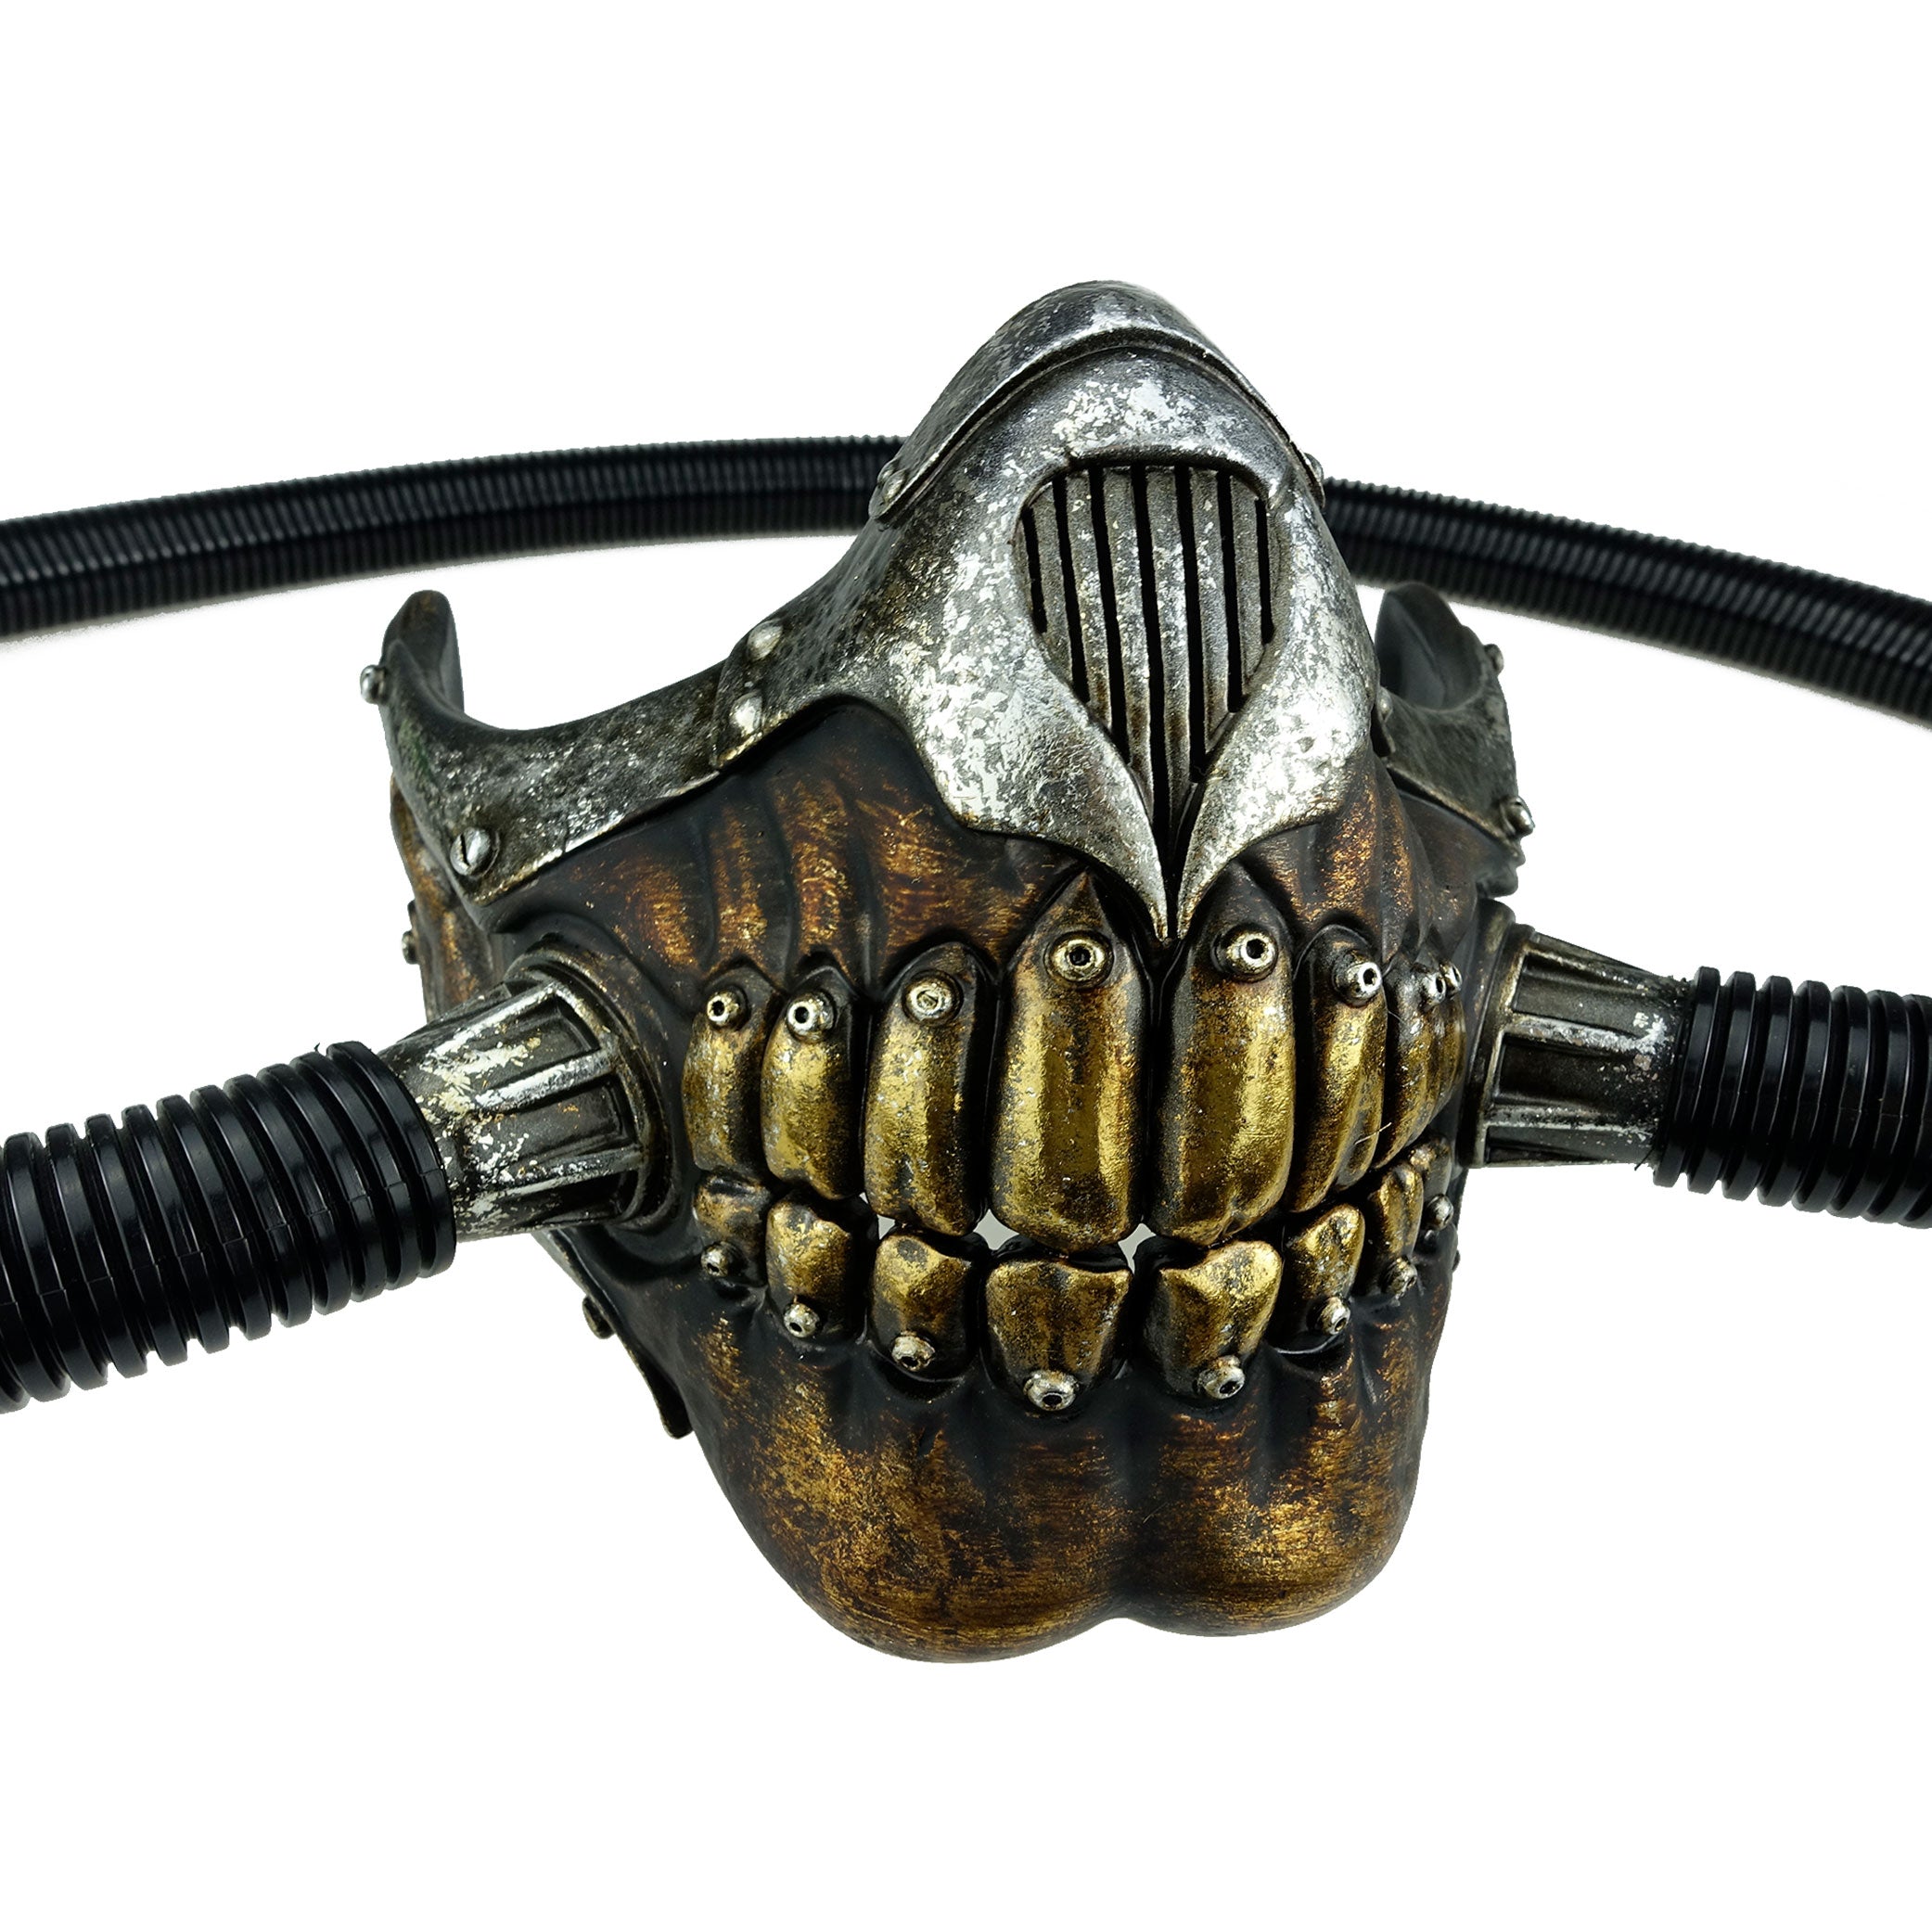 Mad Max Mask with Tube Half Face Mask Latest Adult Halloween Cosplay Costume Accessory Prop